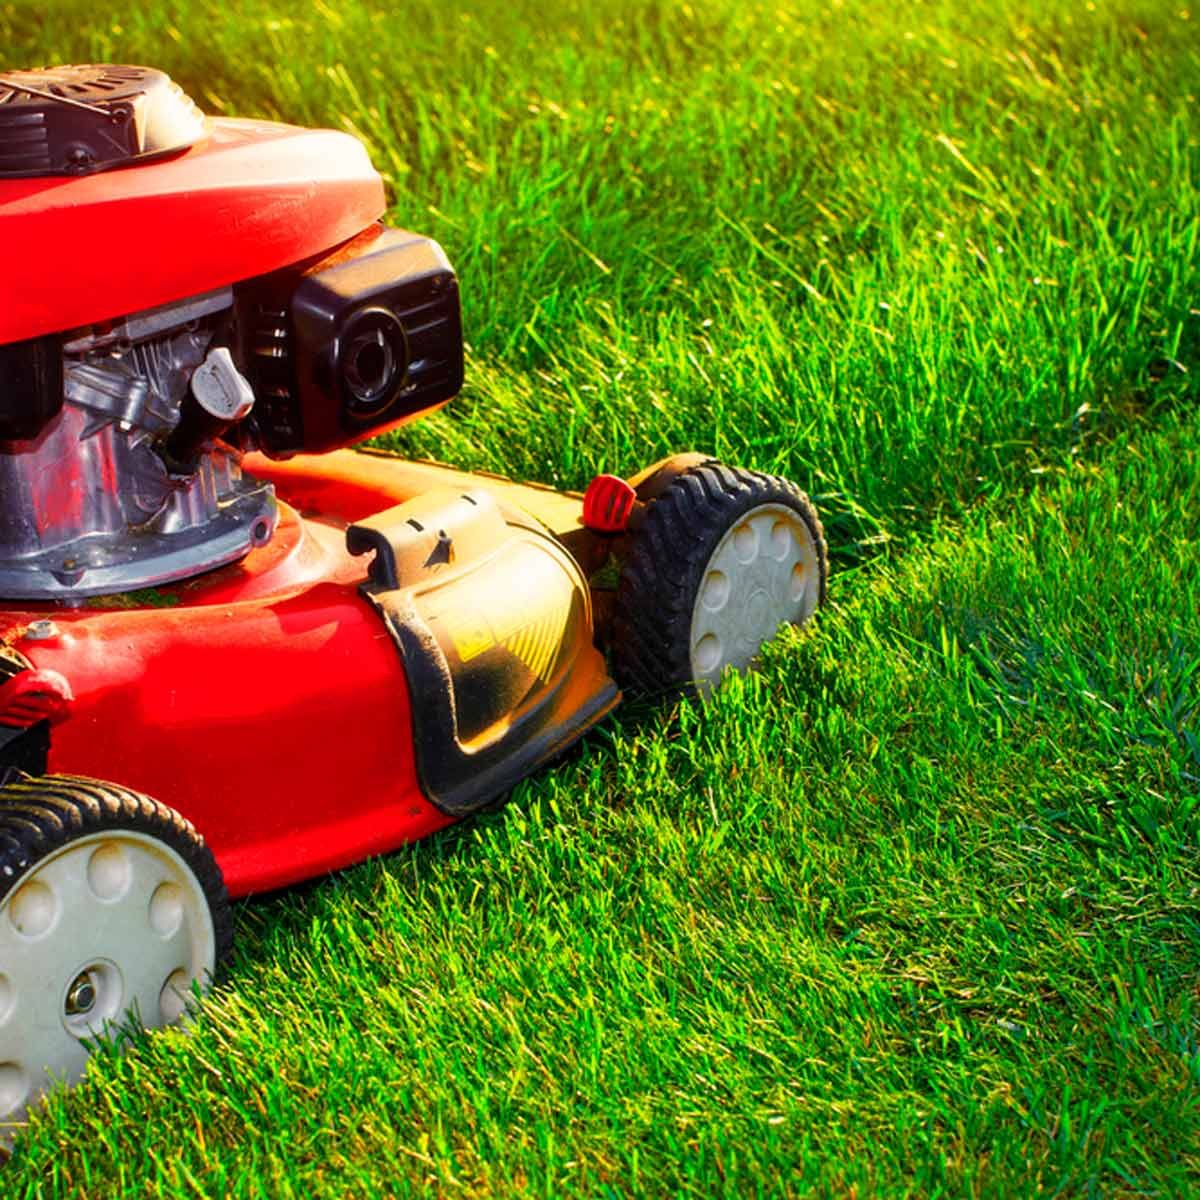 This Is the Most Efficient Way to Mow the Grass